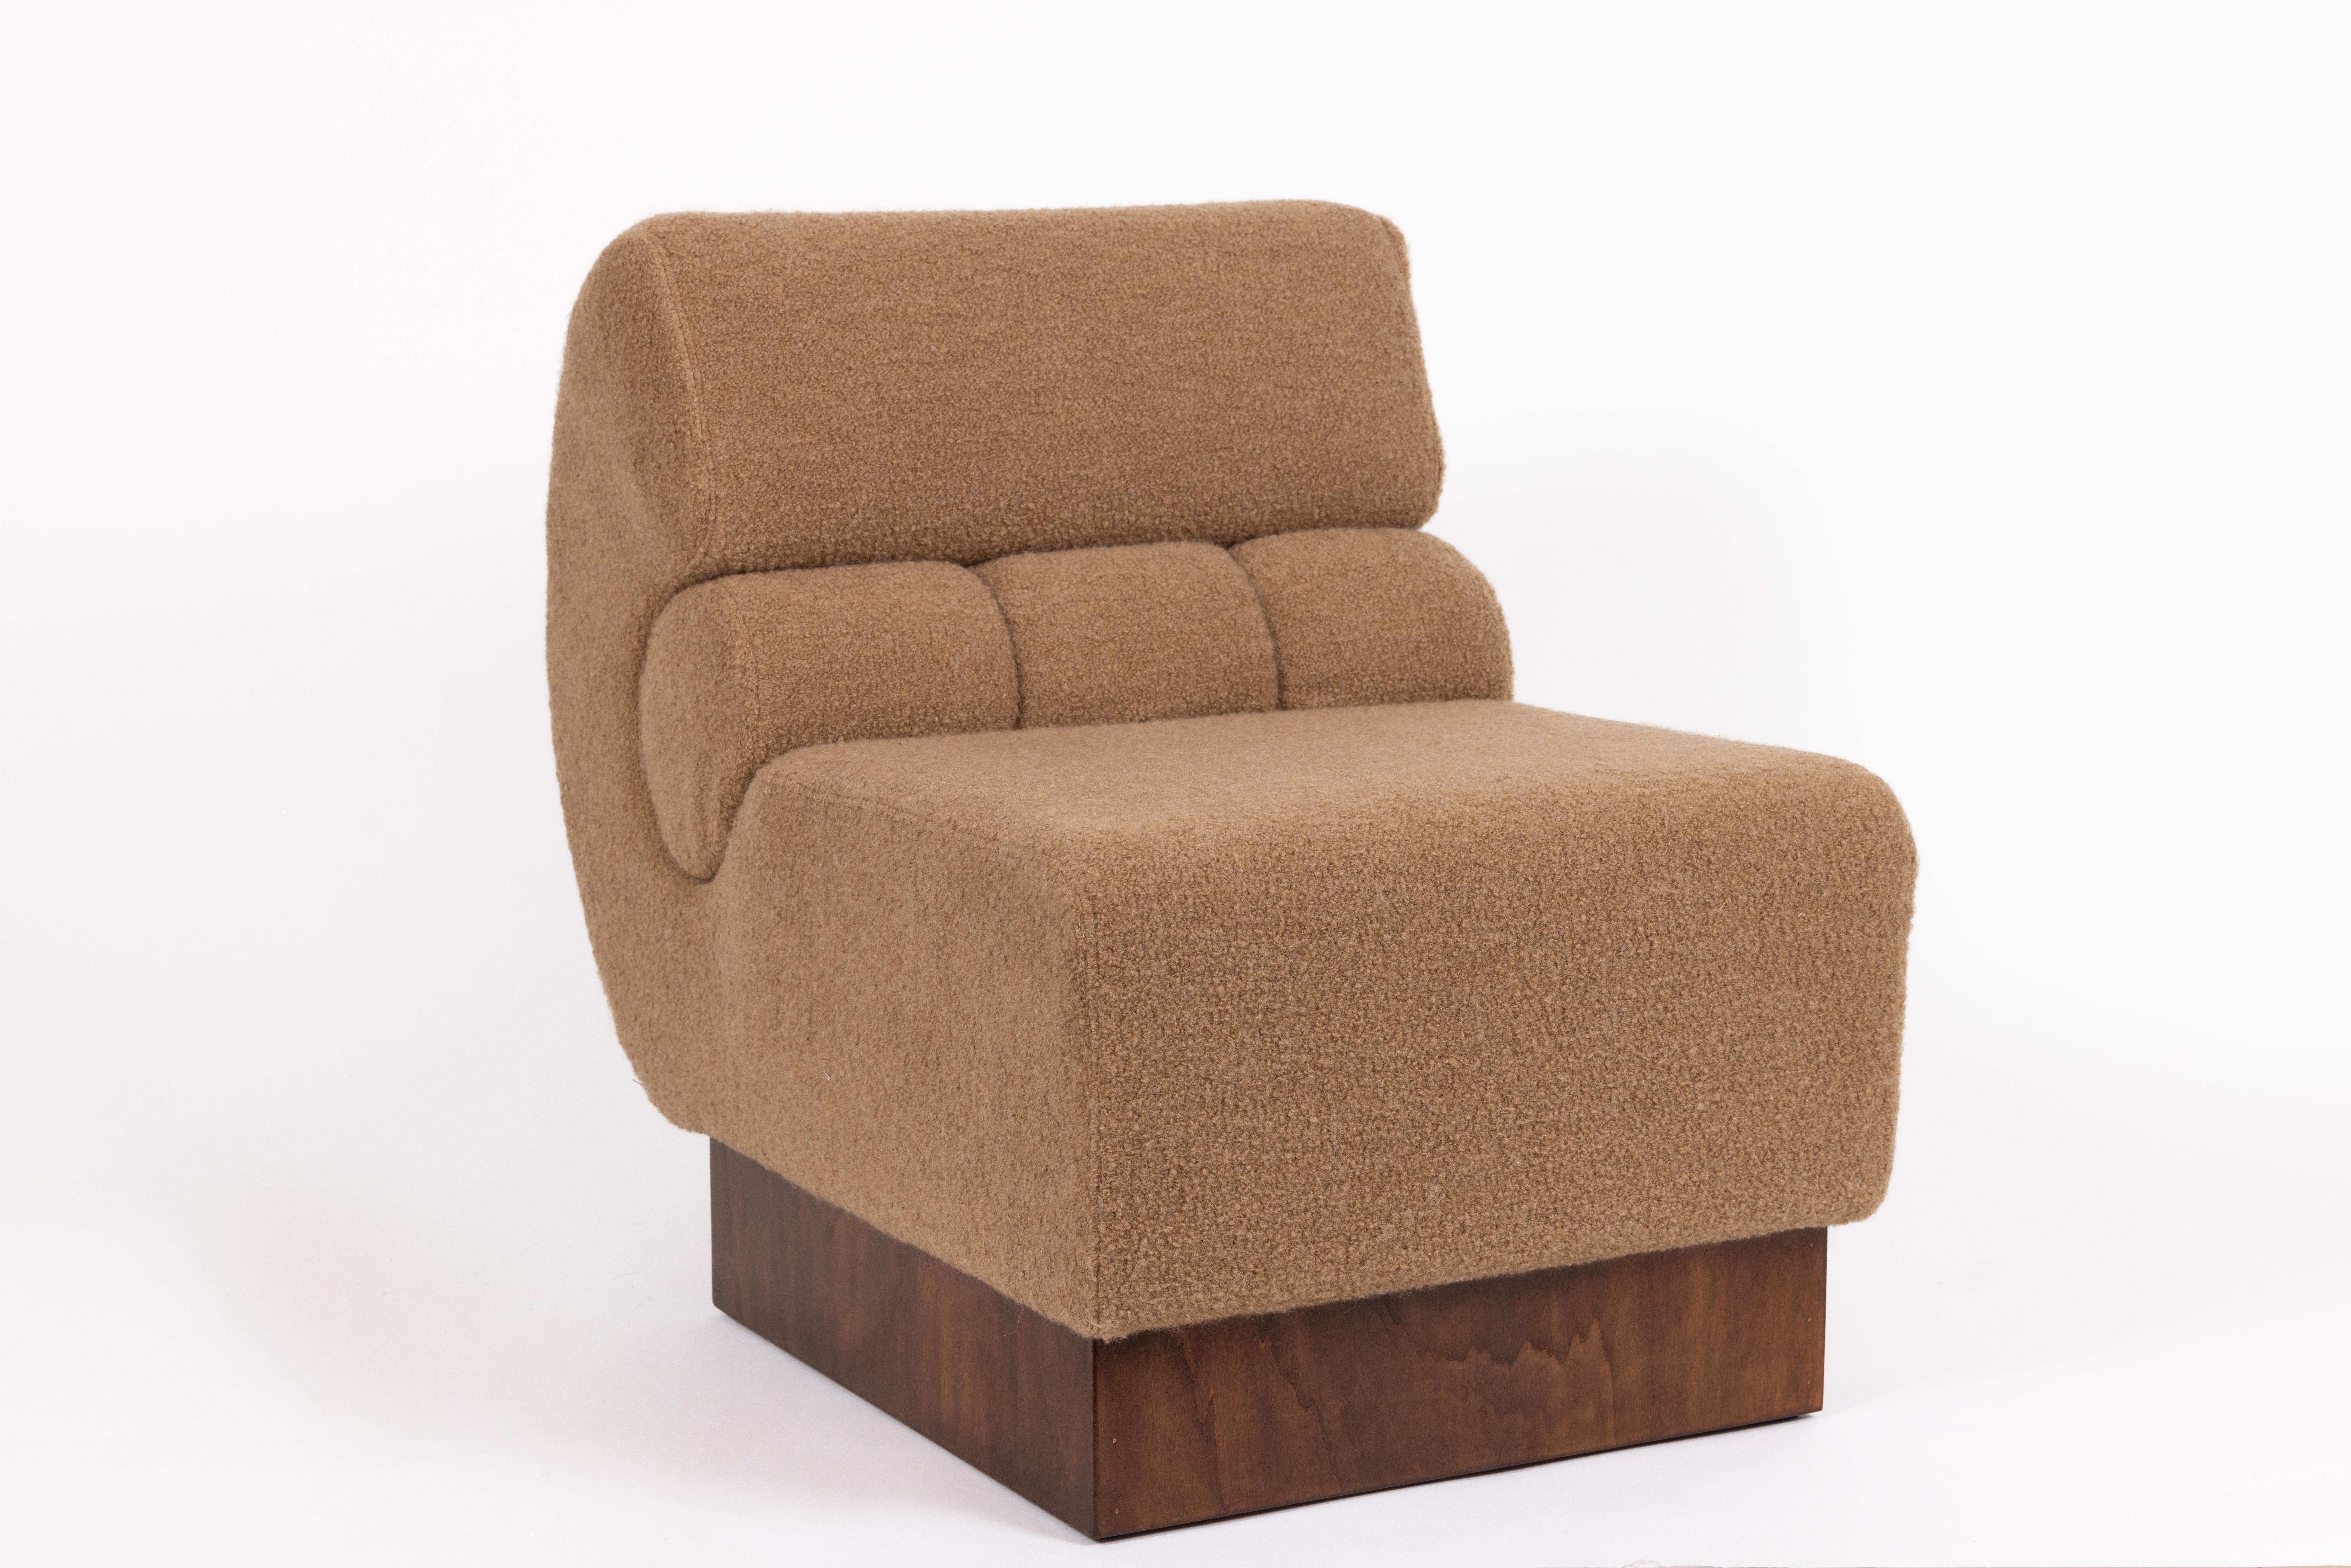 Slipper chair, Italy 70s, Newly Reupholstered in Cashmere Boucle' by Schumacher For Sale 1